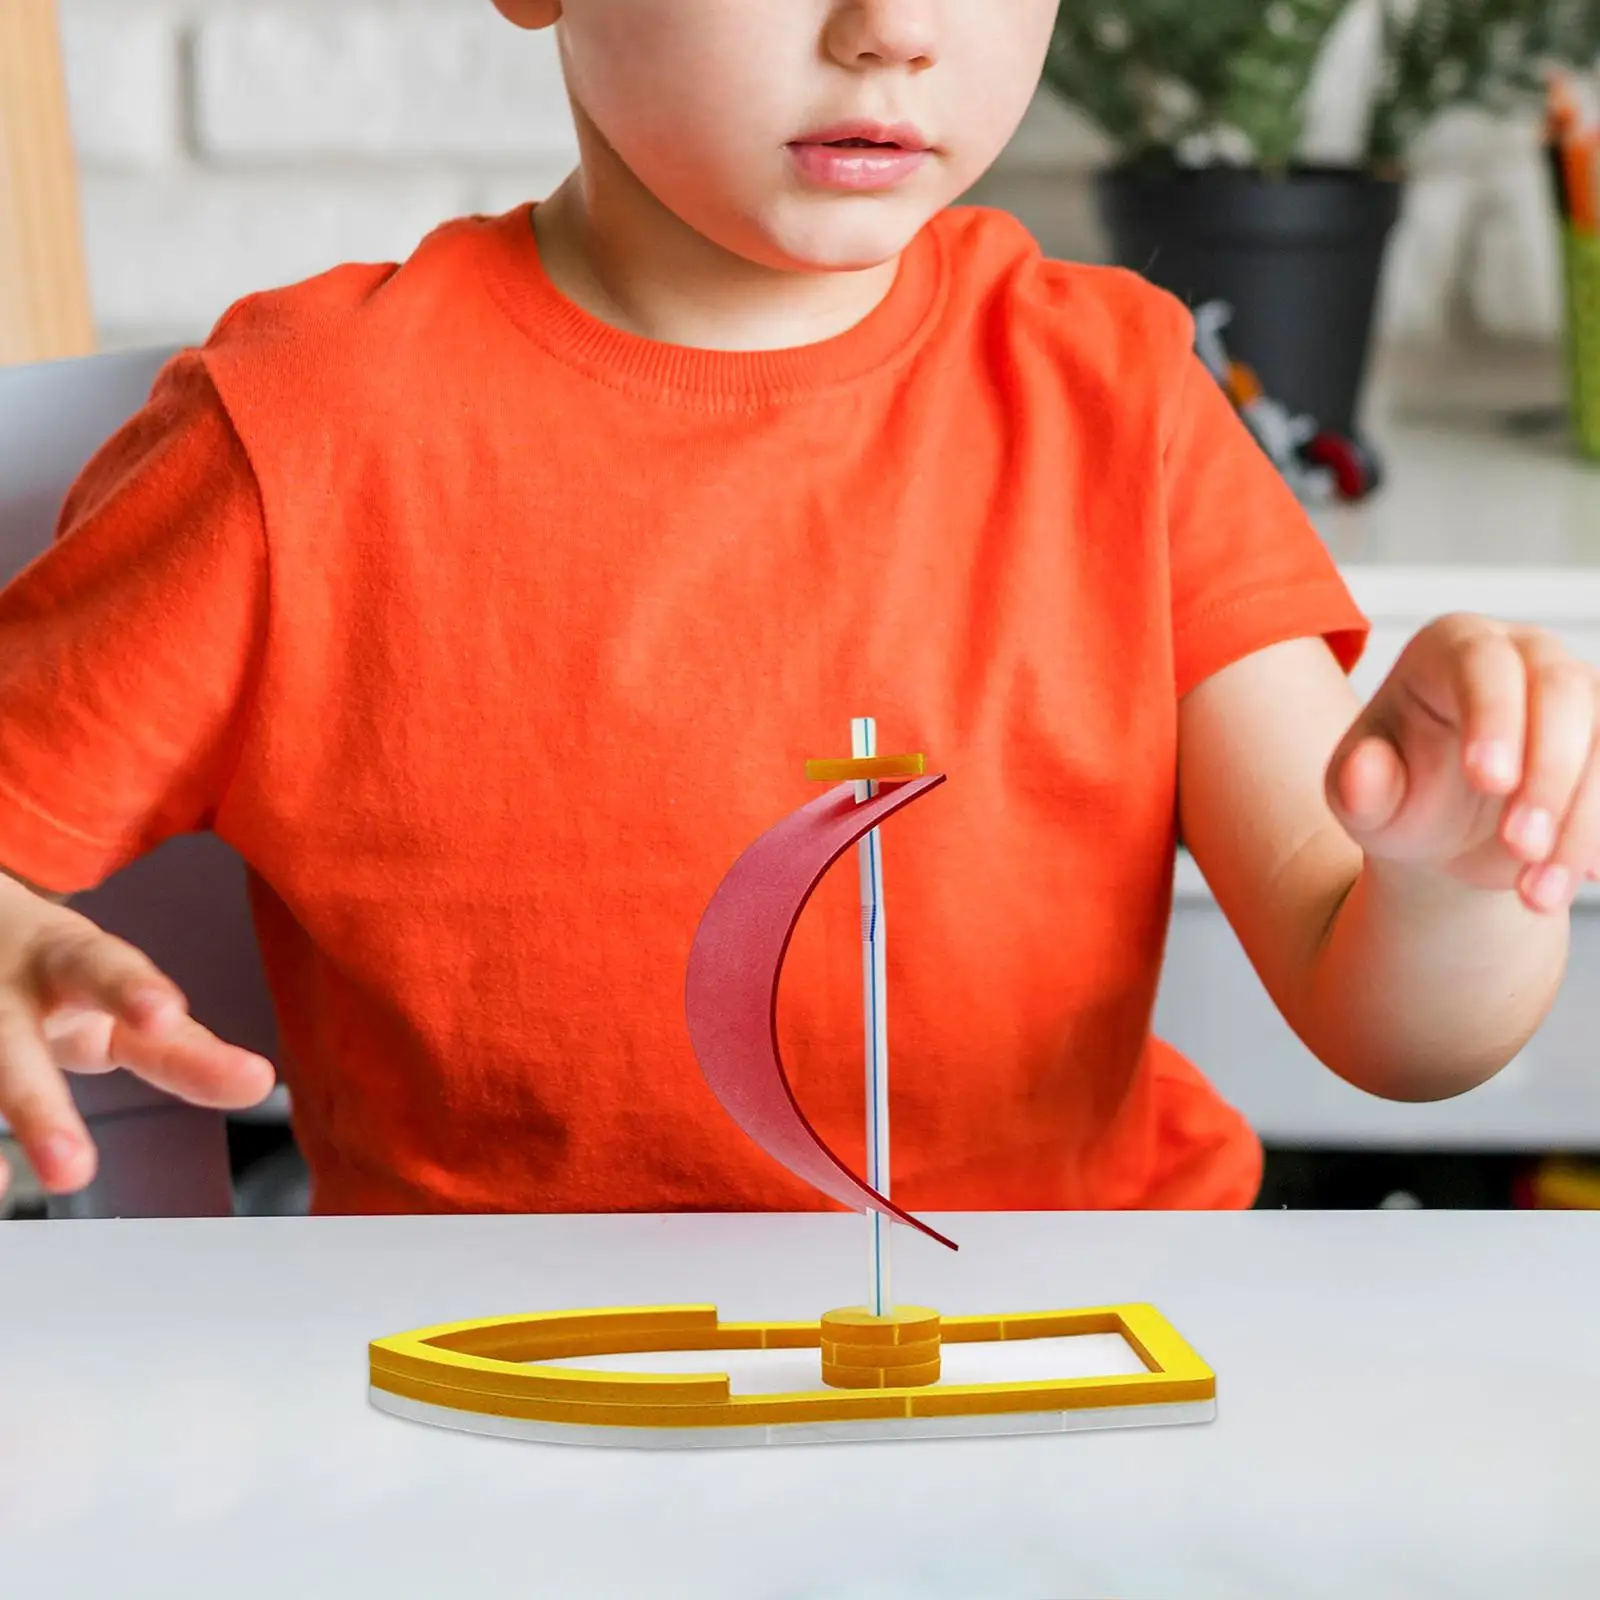 Sailboat Science Projects Experiment Kits Creative Novelty for Interaction